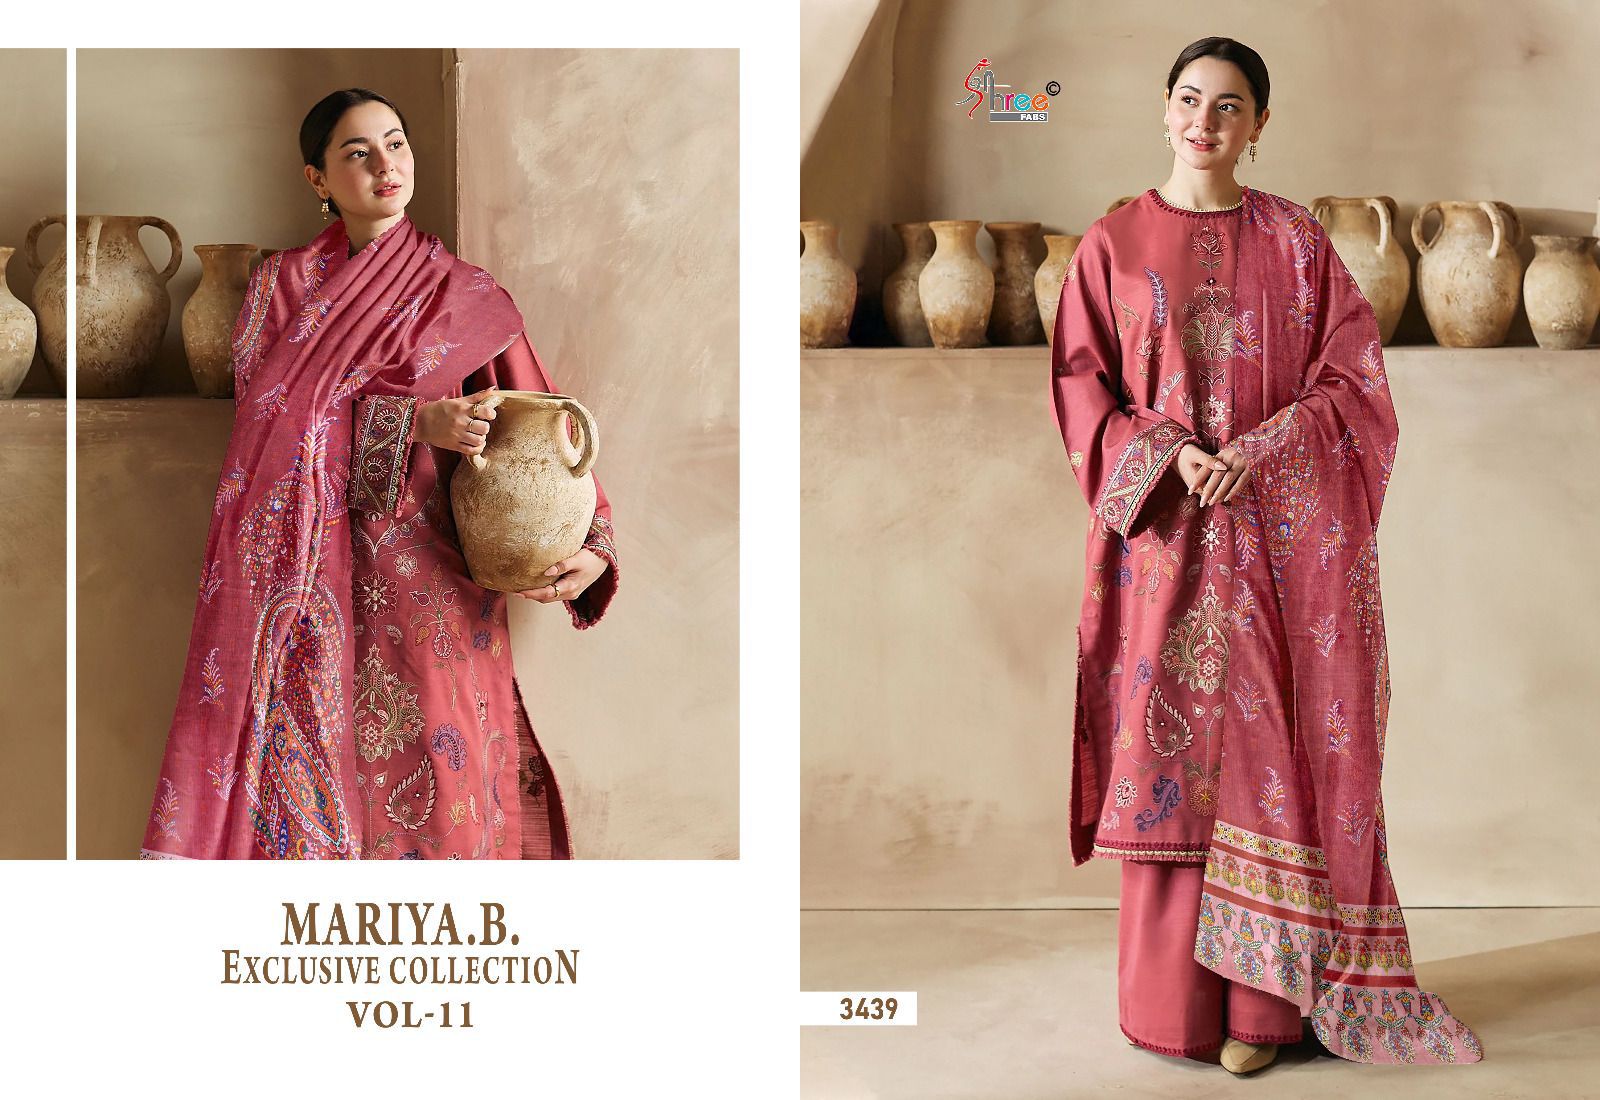 Shree Maria B Exclusive Collection Vol 11 collection 3